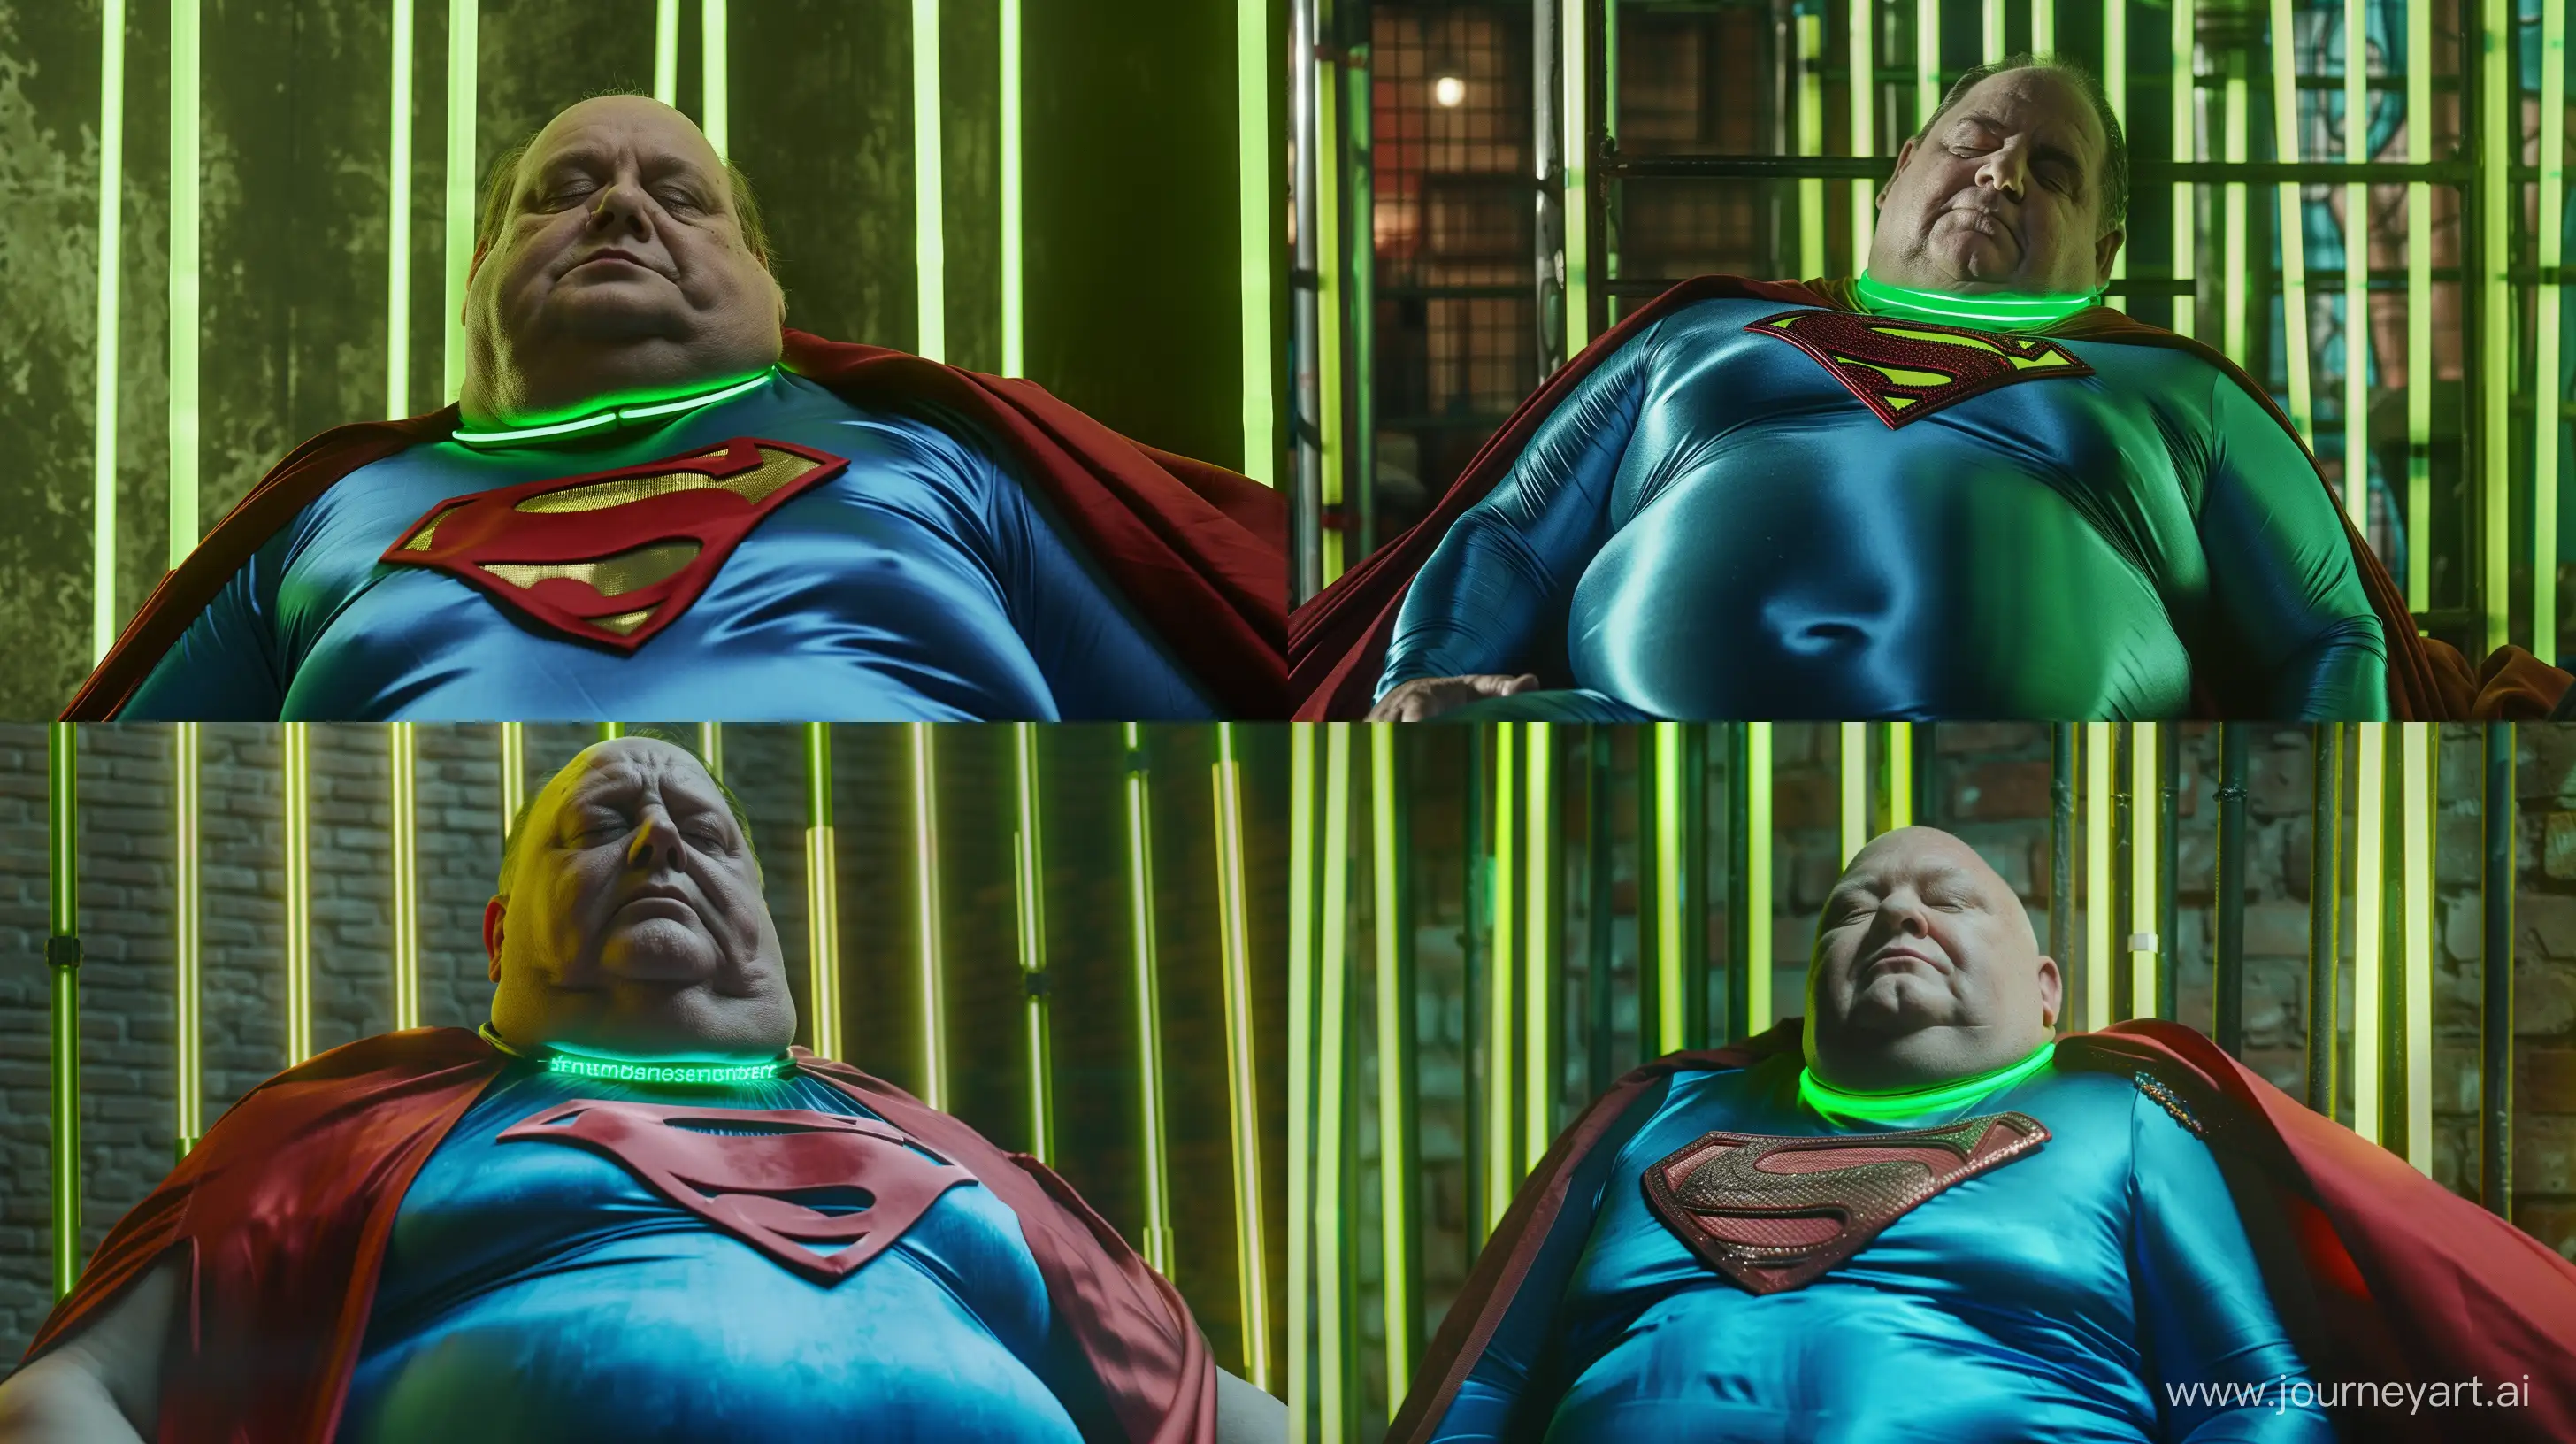 Elderly-Superman-Resting-Against-Glowing-Neon-Bars-in-Natural-Daylight